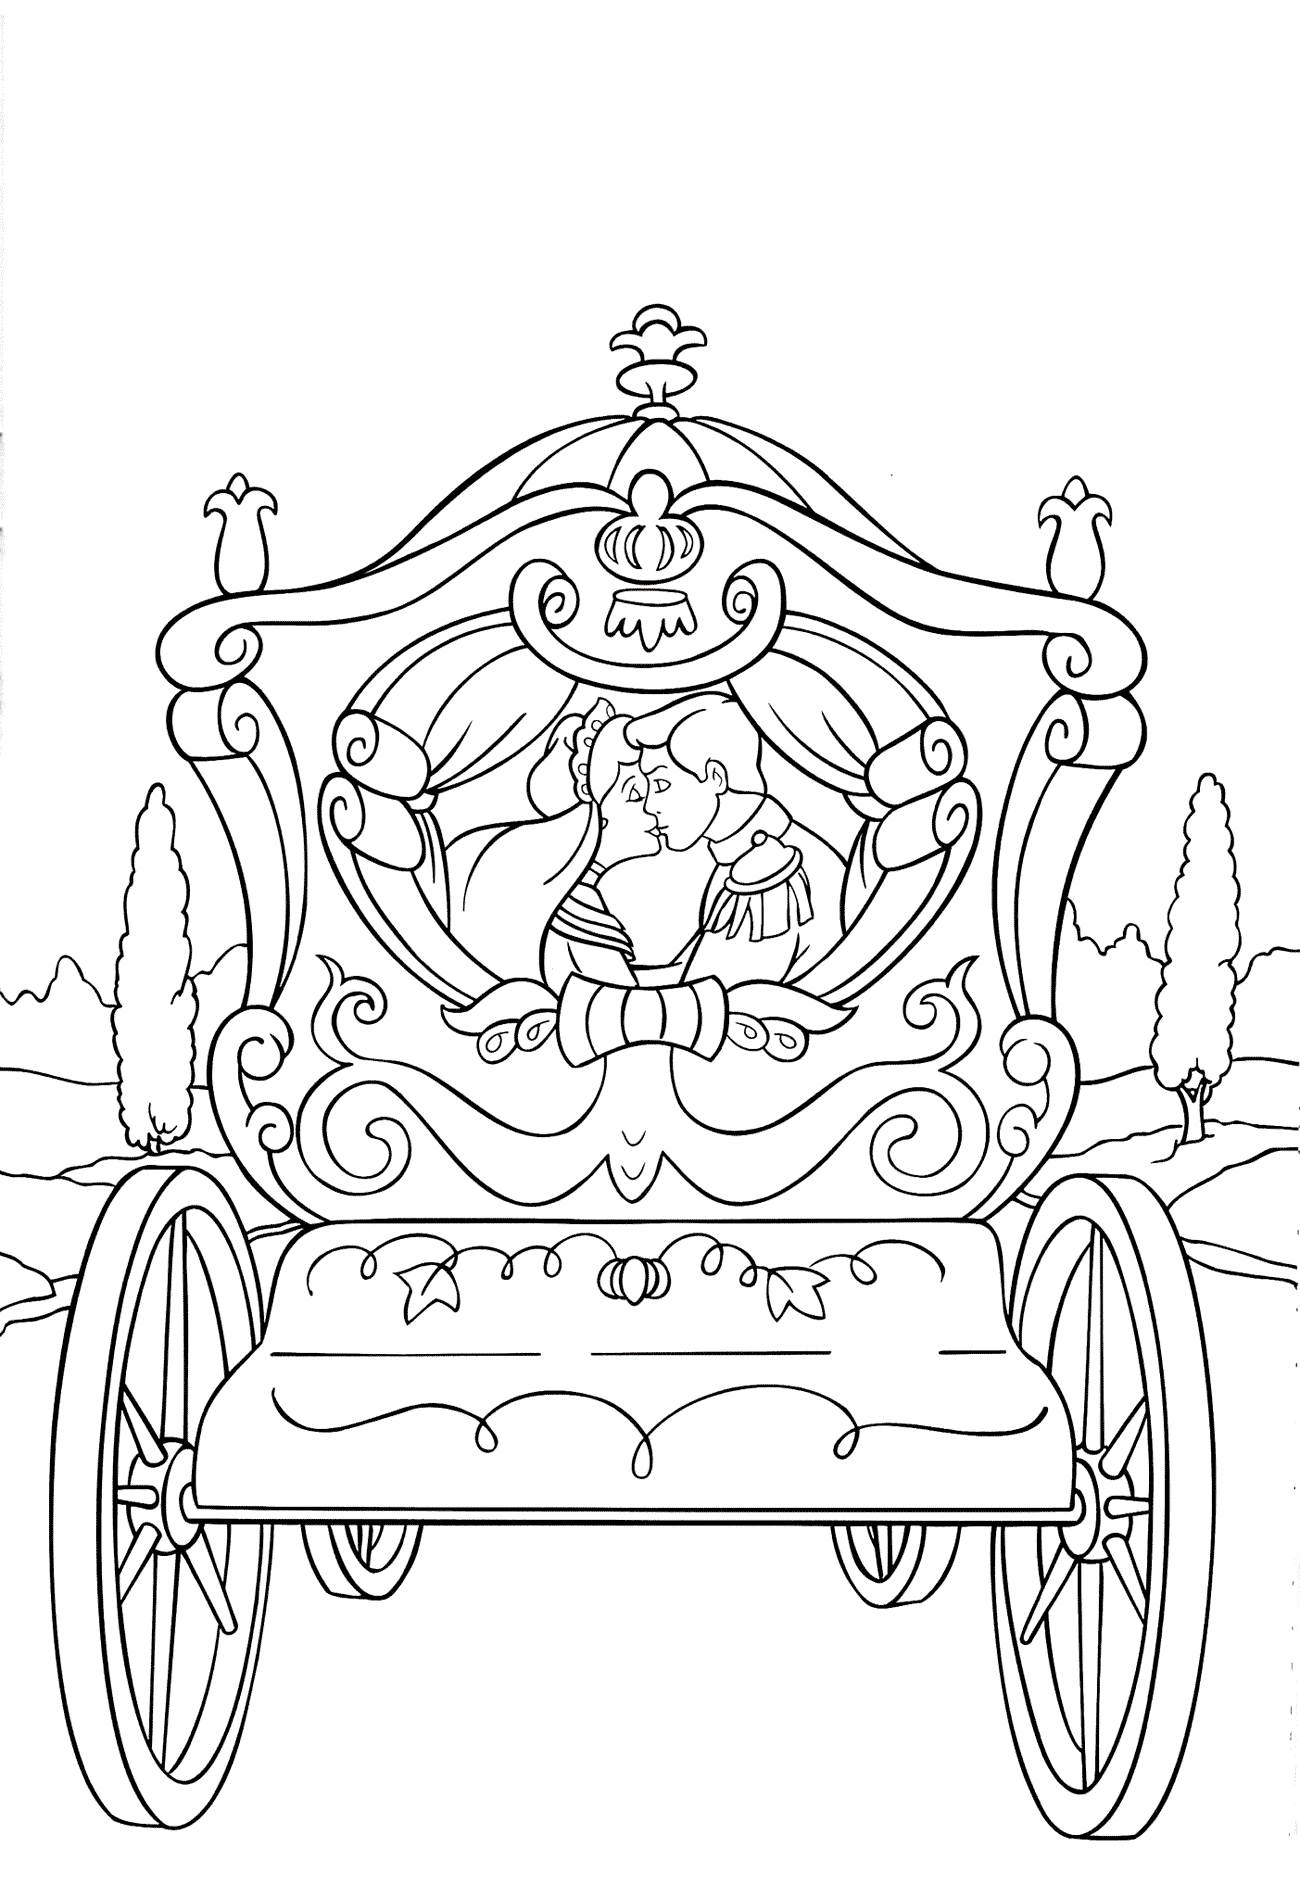 Coloring page - Cinderella and the Prince in a carriage